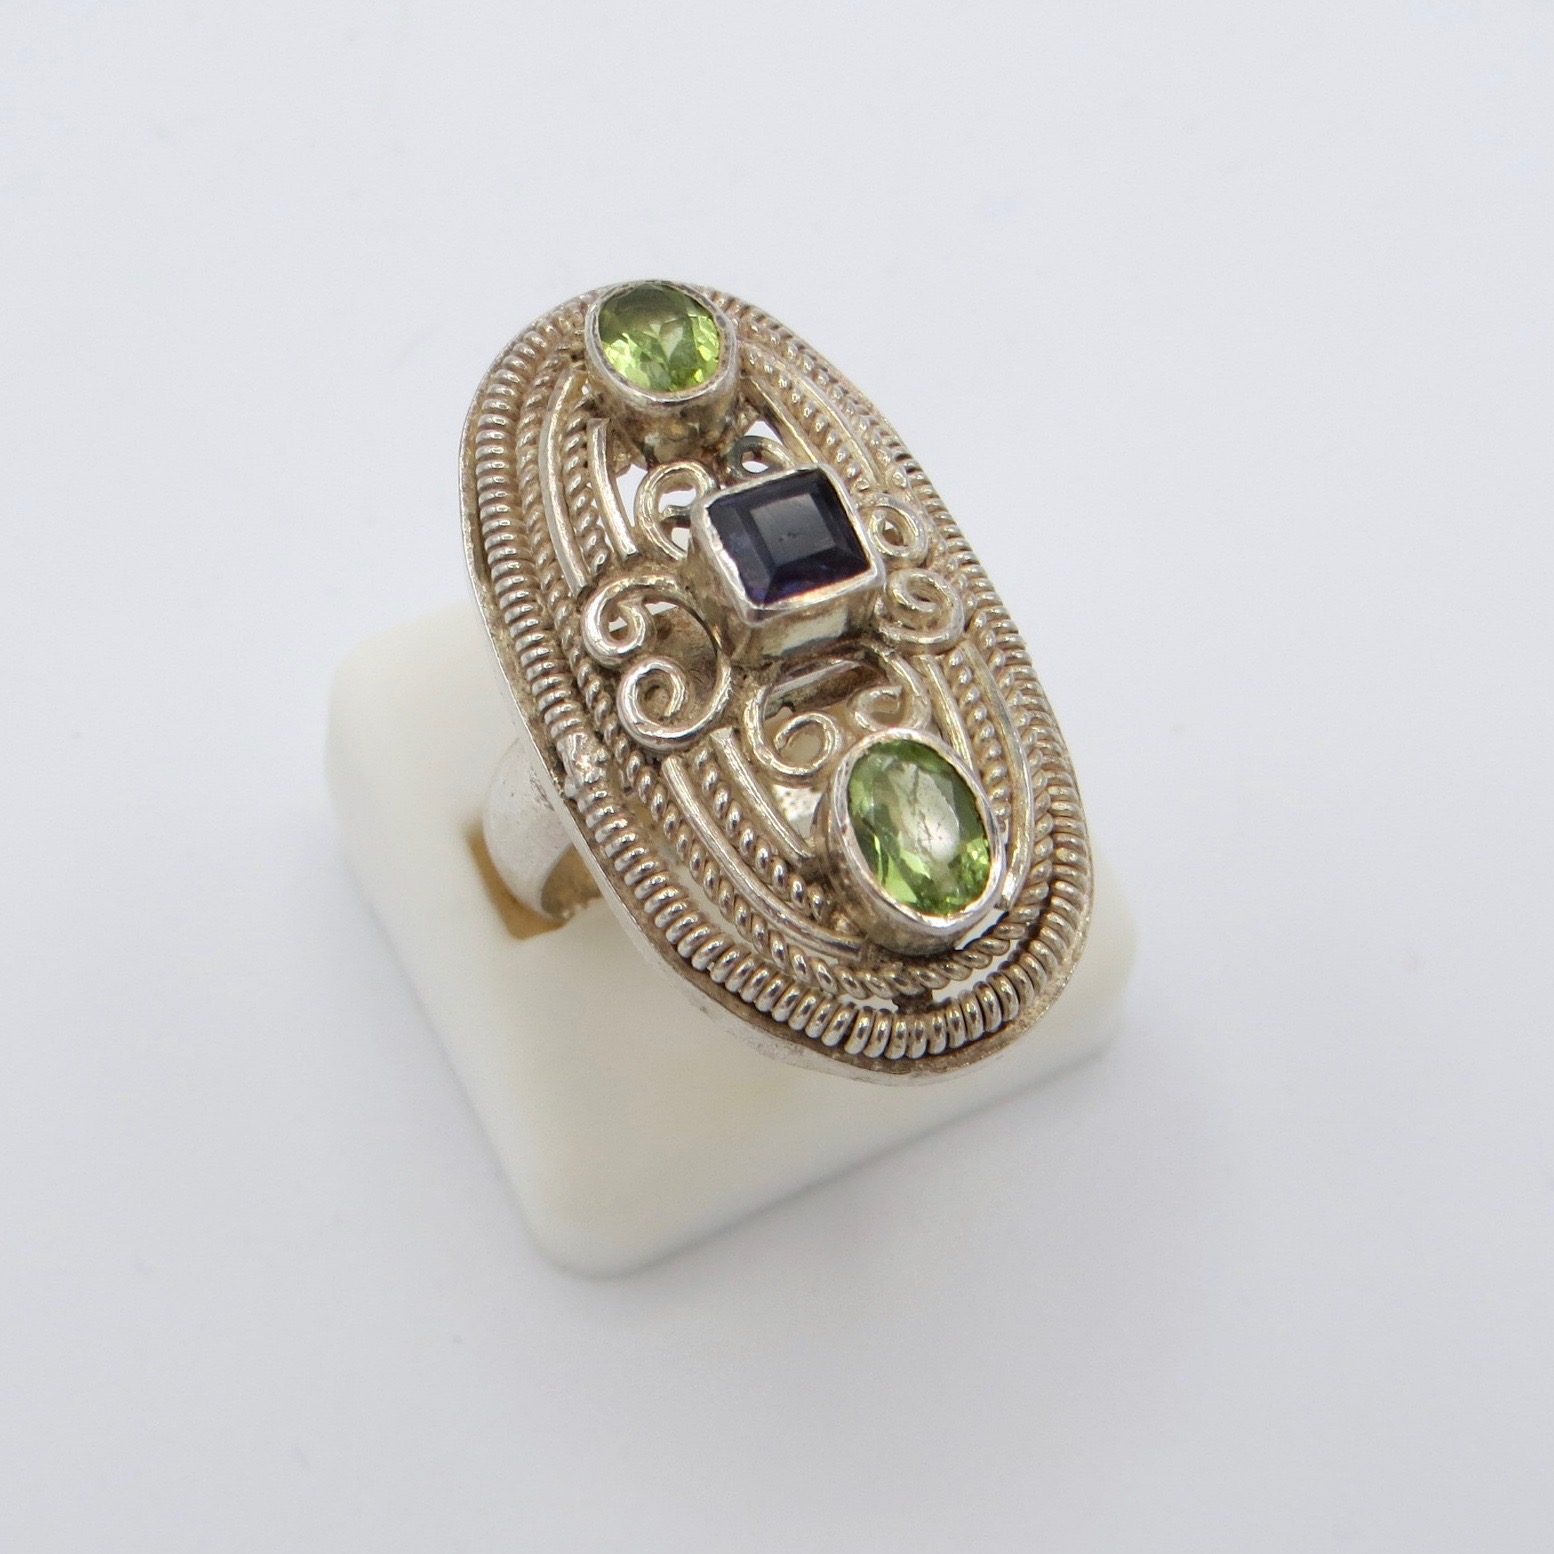 Sterling Silver Filigree Ring with Peridot and Iolite